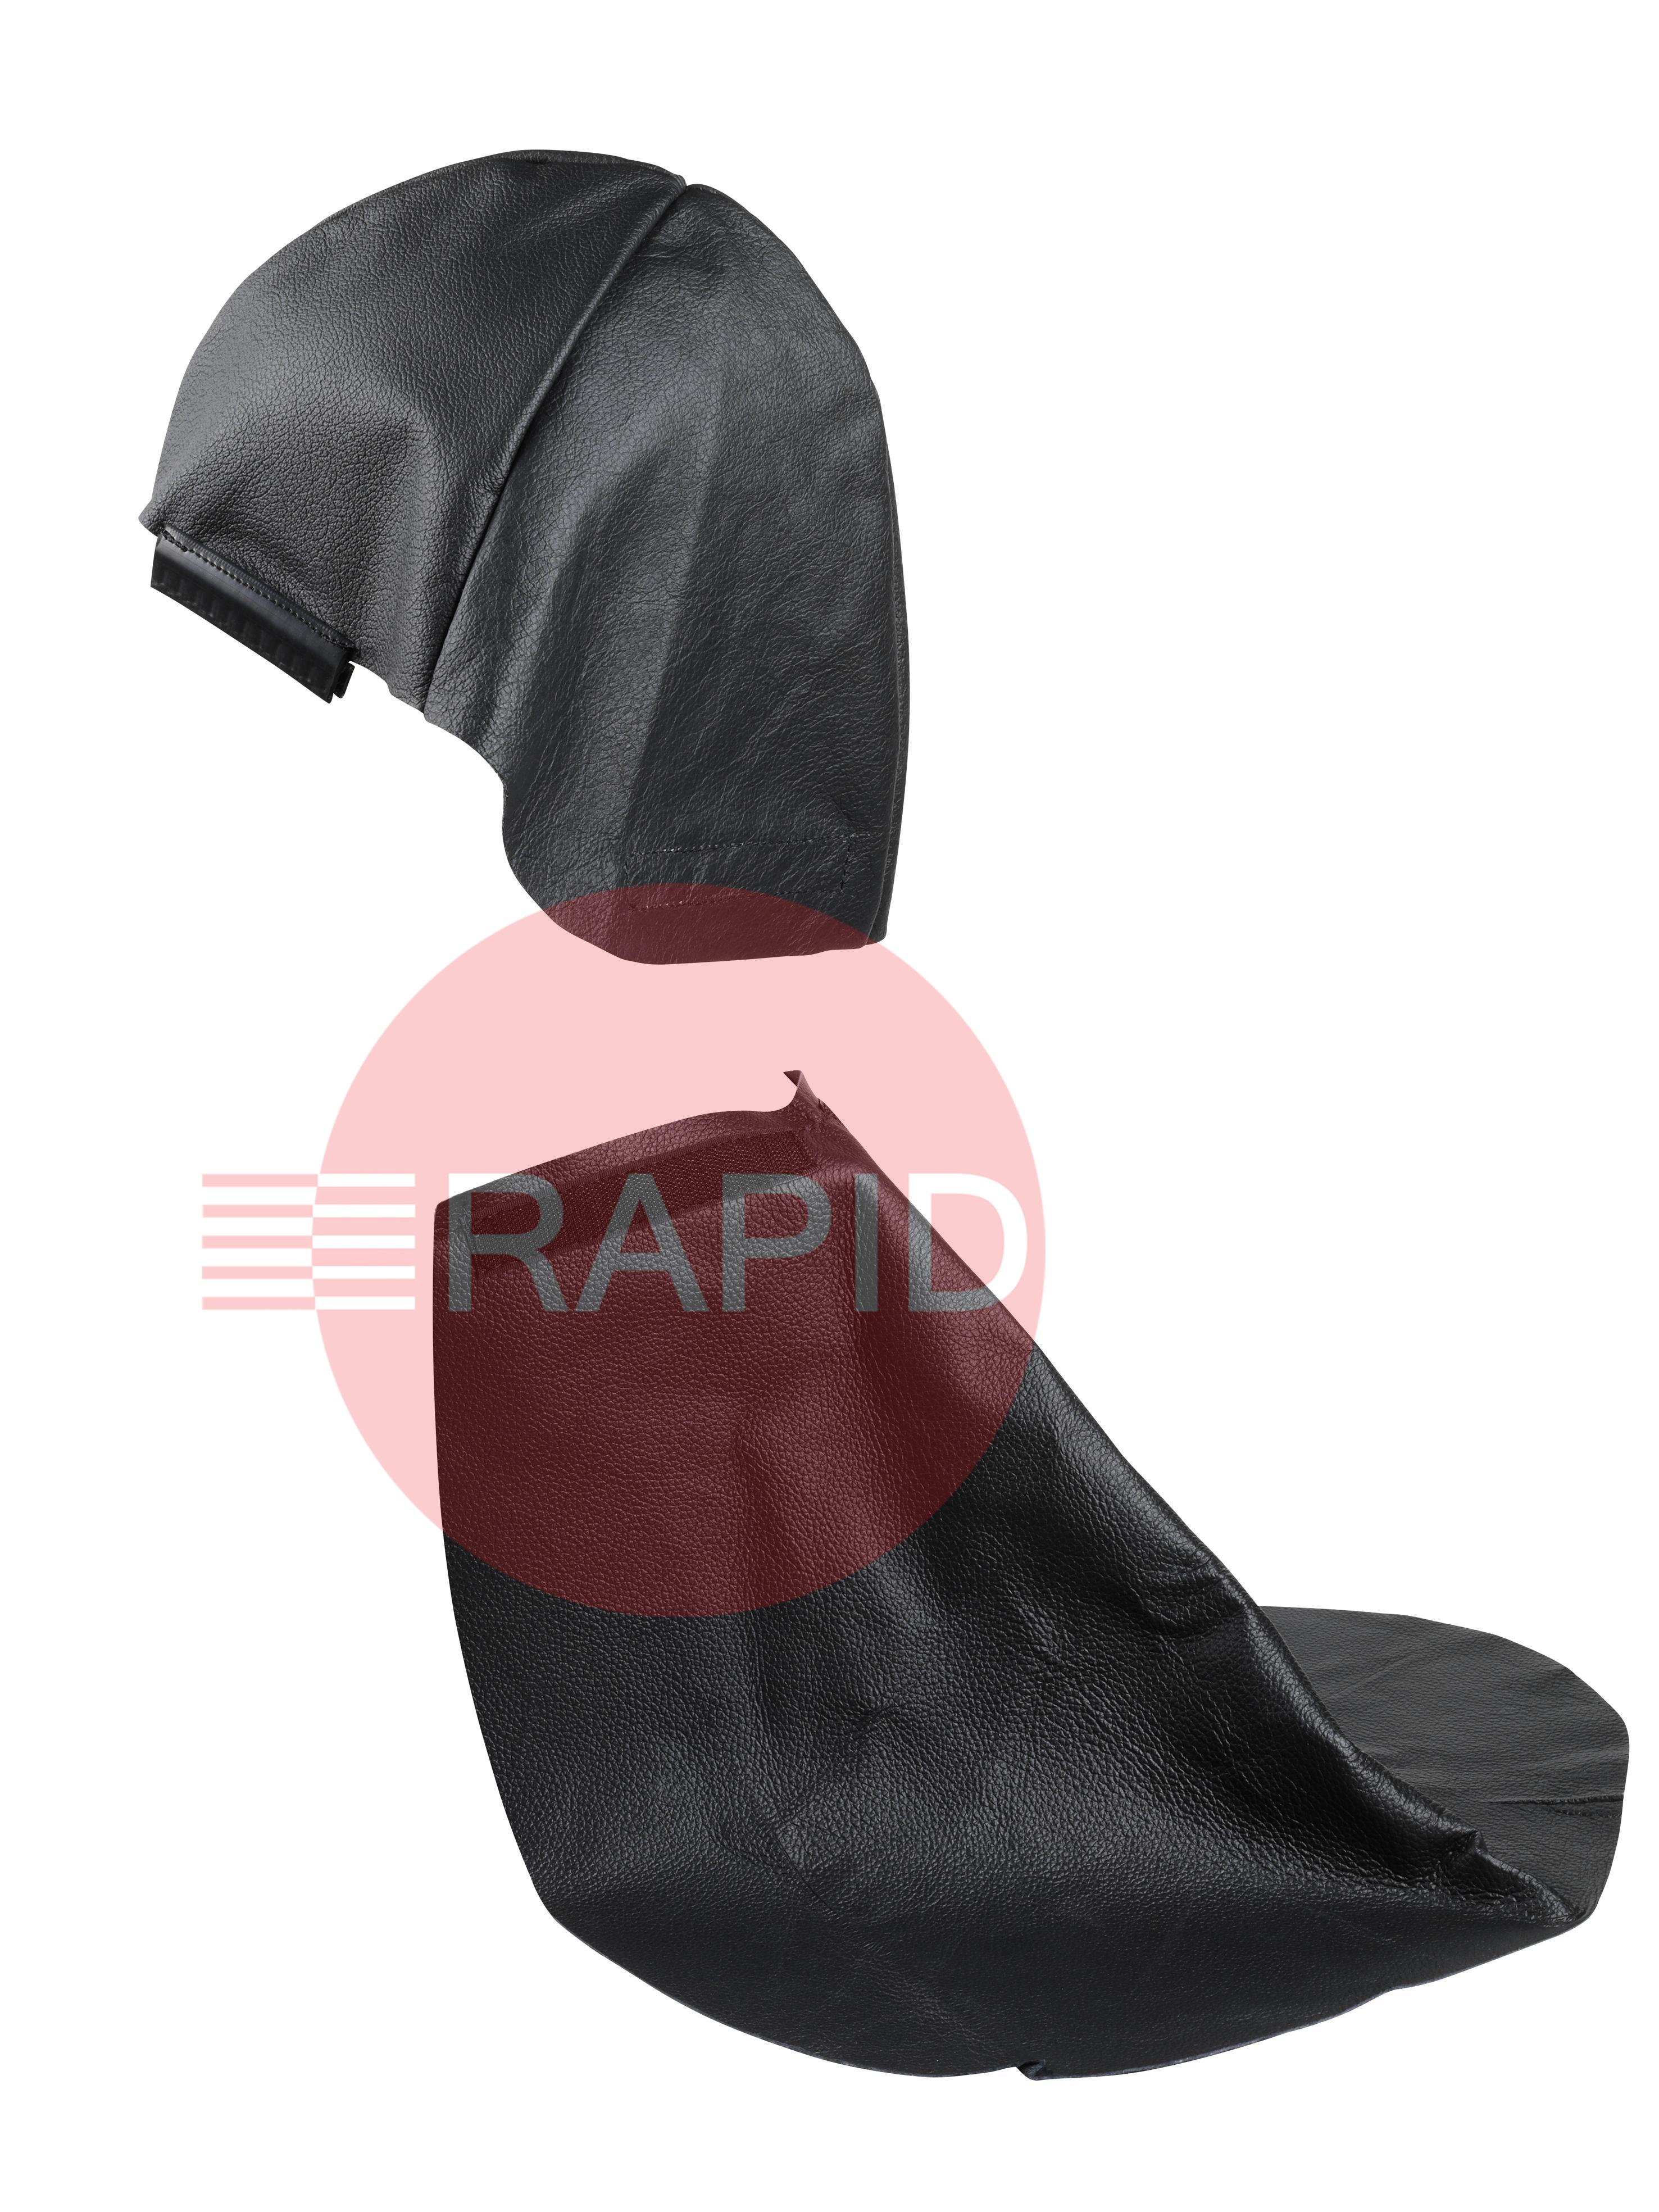 4028.016  Optrel Leather Head & Neck Protection (Panoramaxx / E600 / P500 / P330 / B600 / Liteflip) *(Not suitable for E600 with PAPR)*